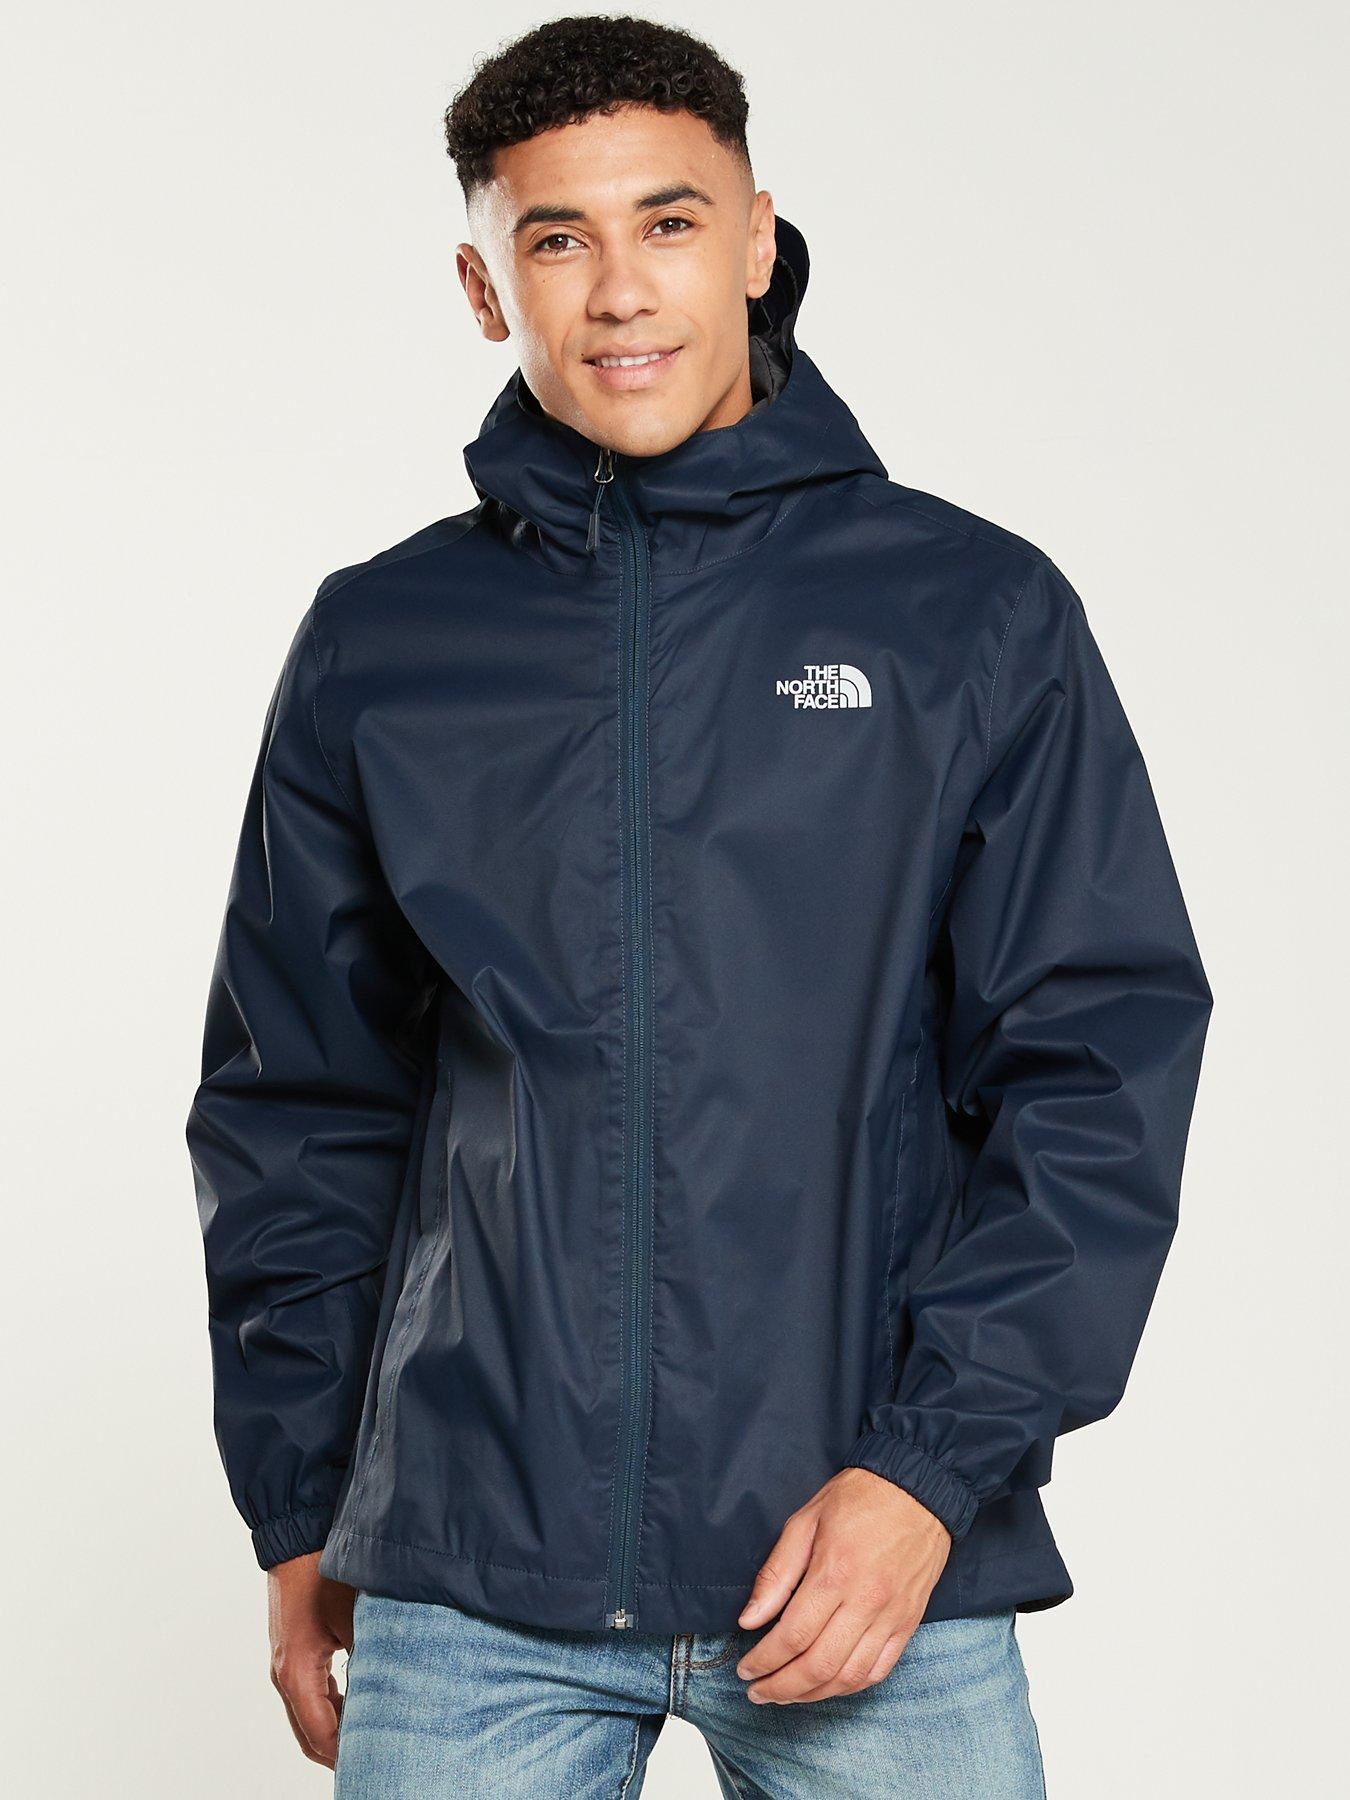 THE NORTH FACE Quest Jacket - Navy 